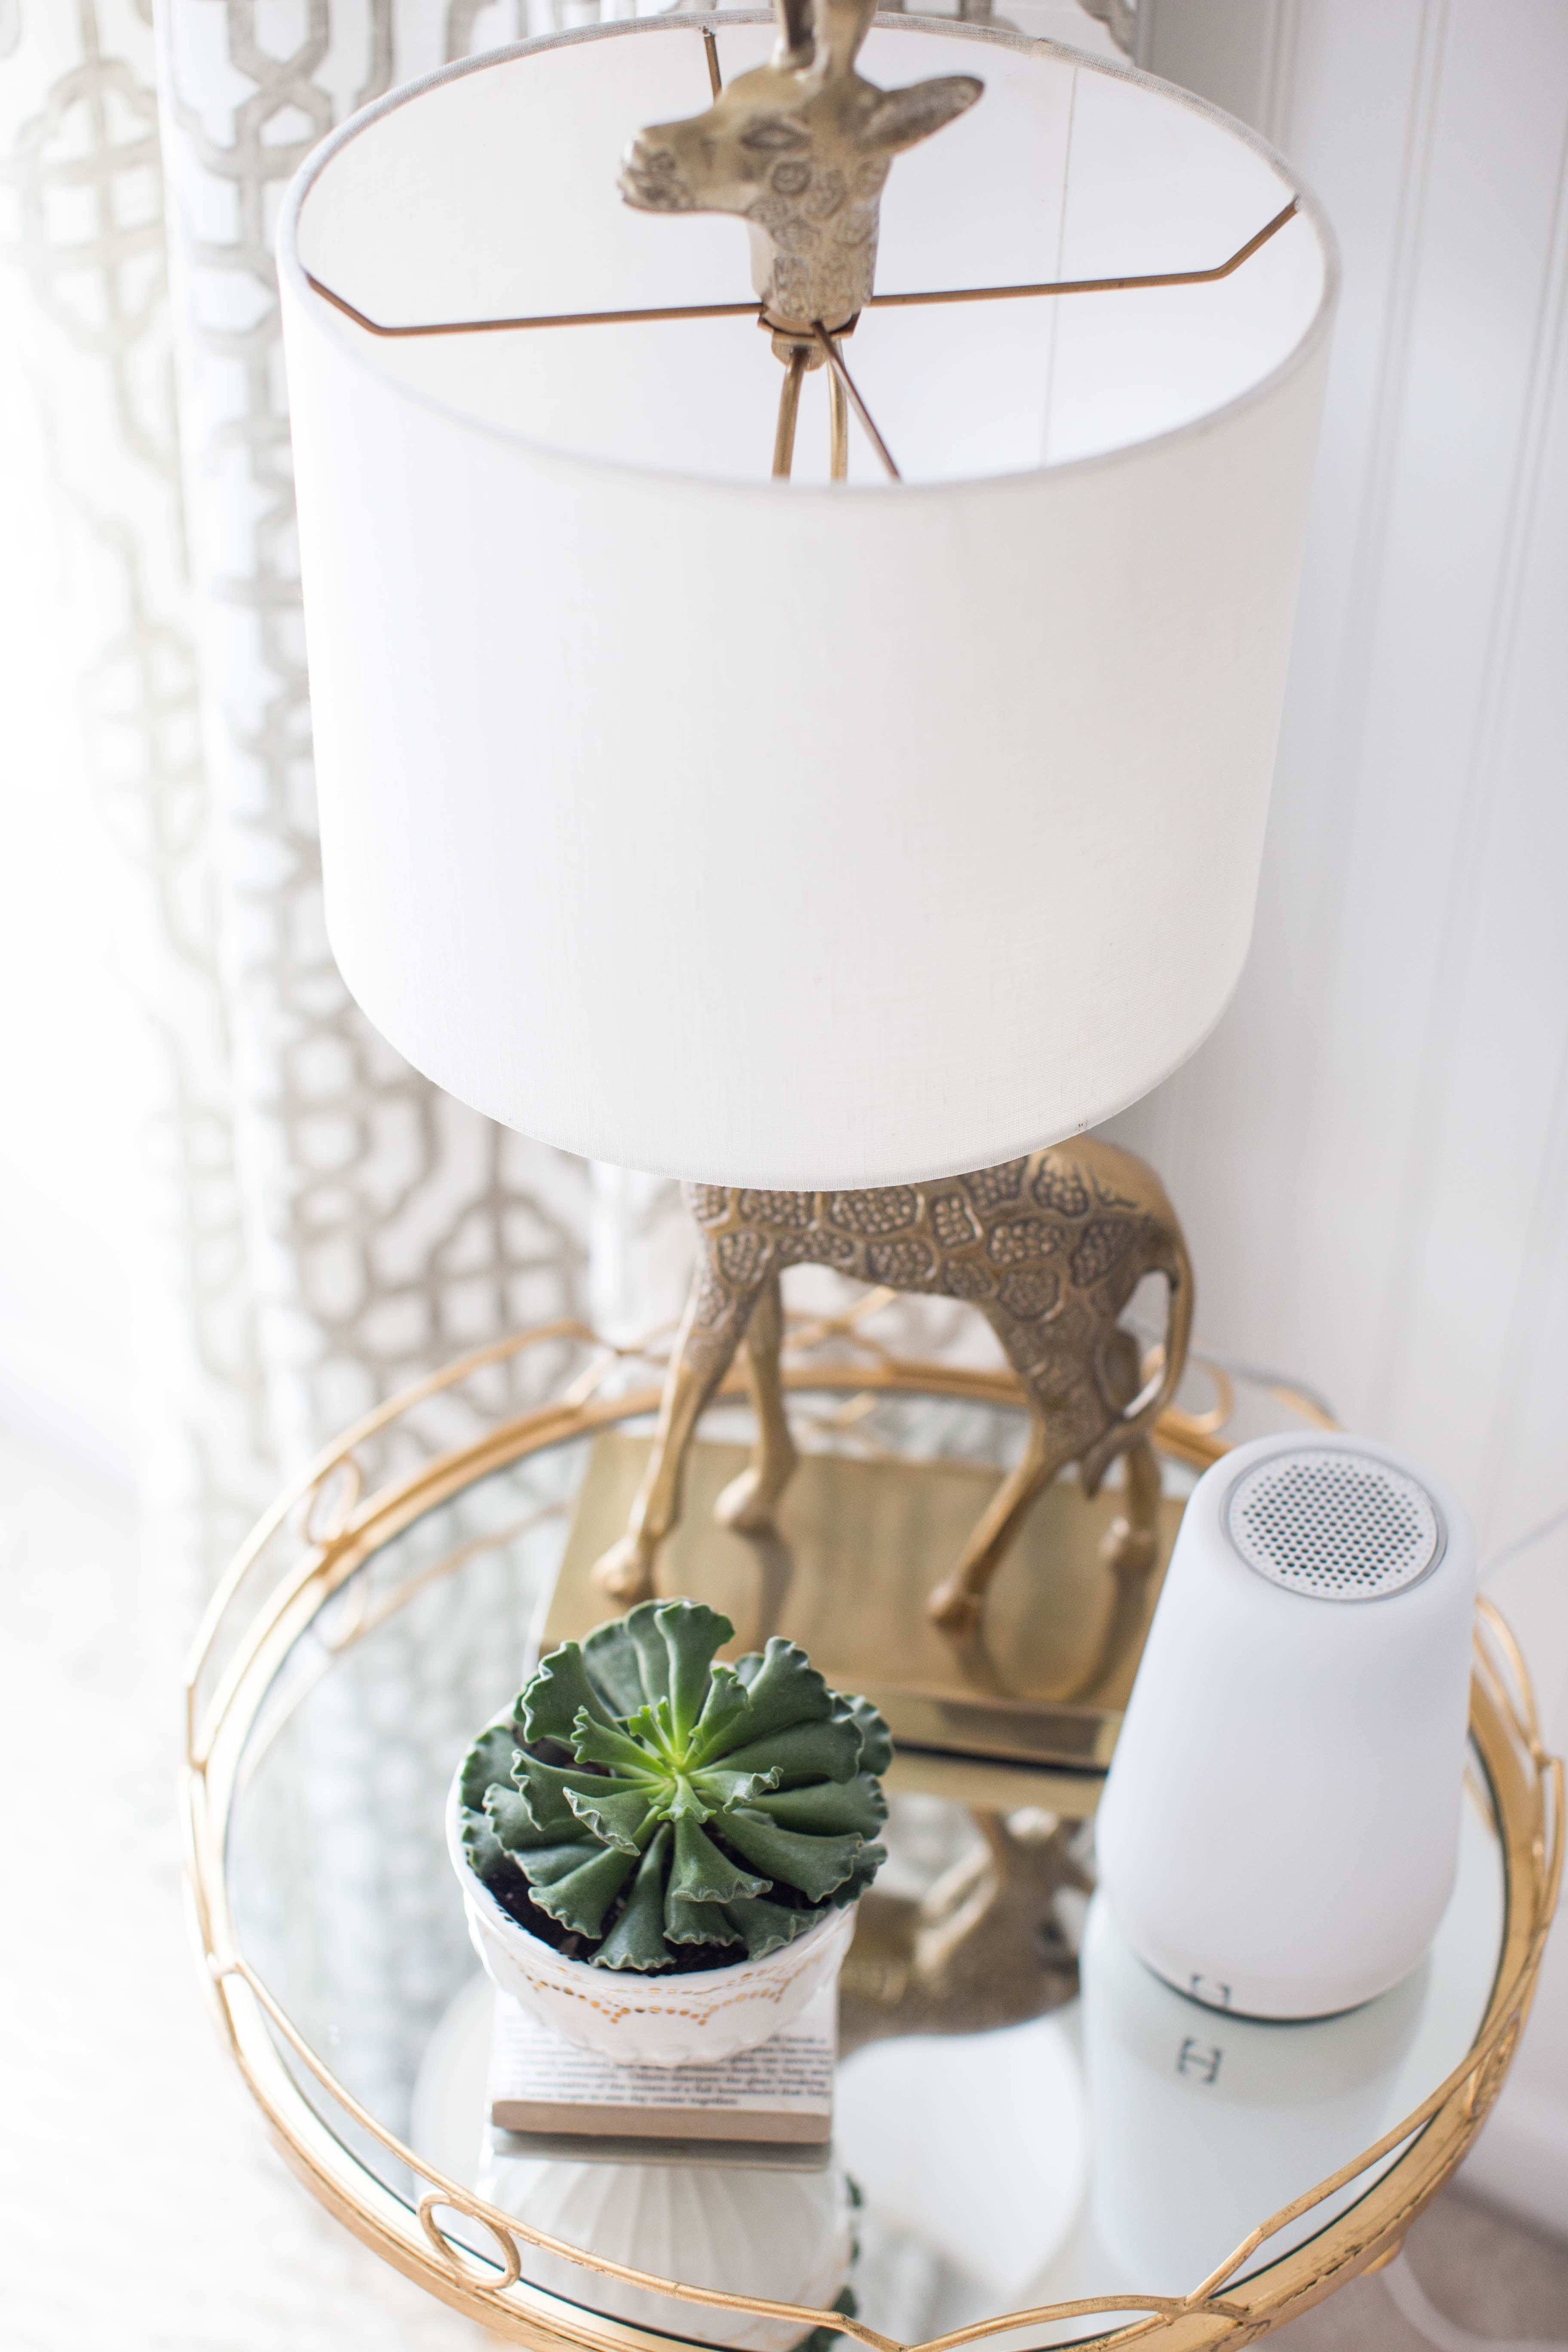 Must Have Nursery Items from Our Amazon Registry by NC lifestyle blogger Coffee Beans and Bobby Pins